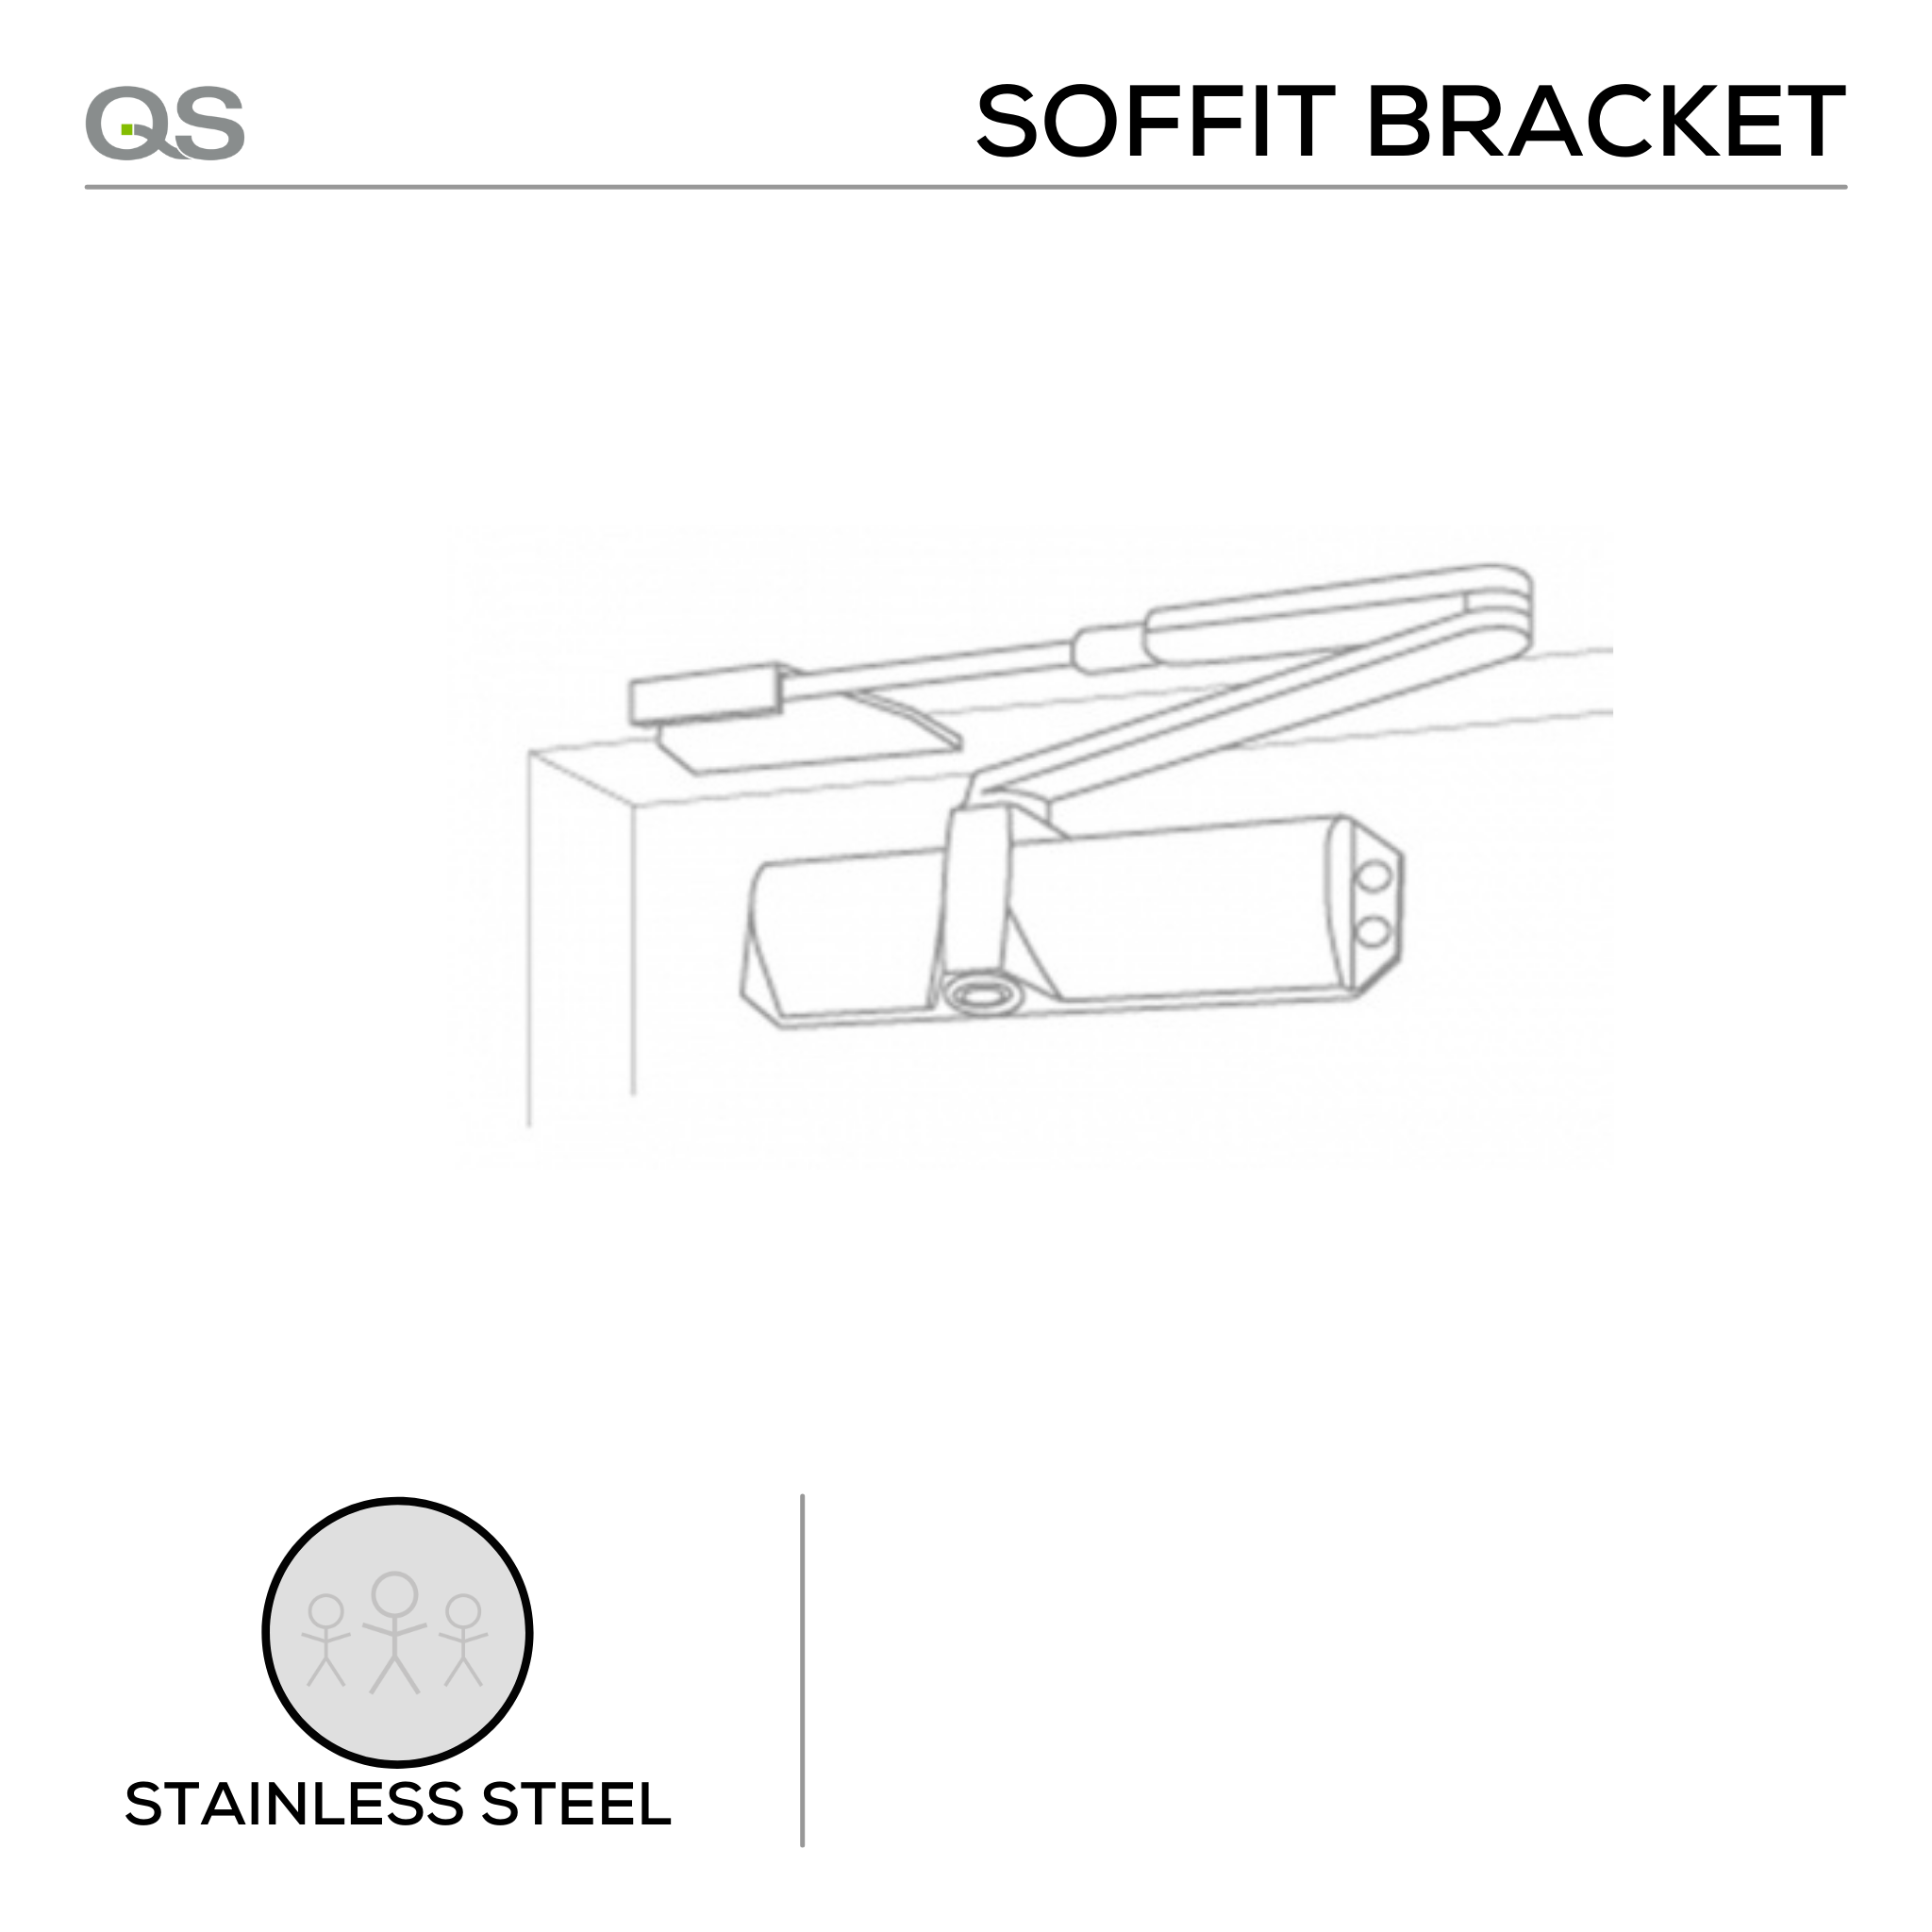 QS7708 Universal Soffit Bracket for use with all QS Door Closers, QS